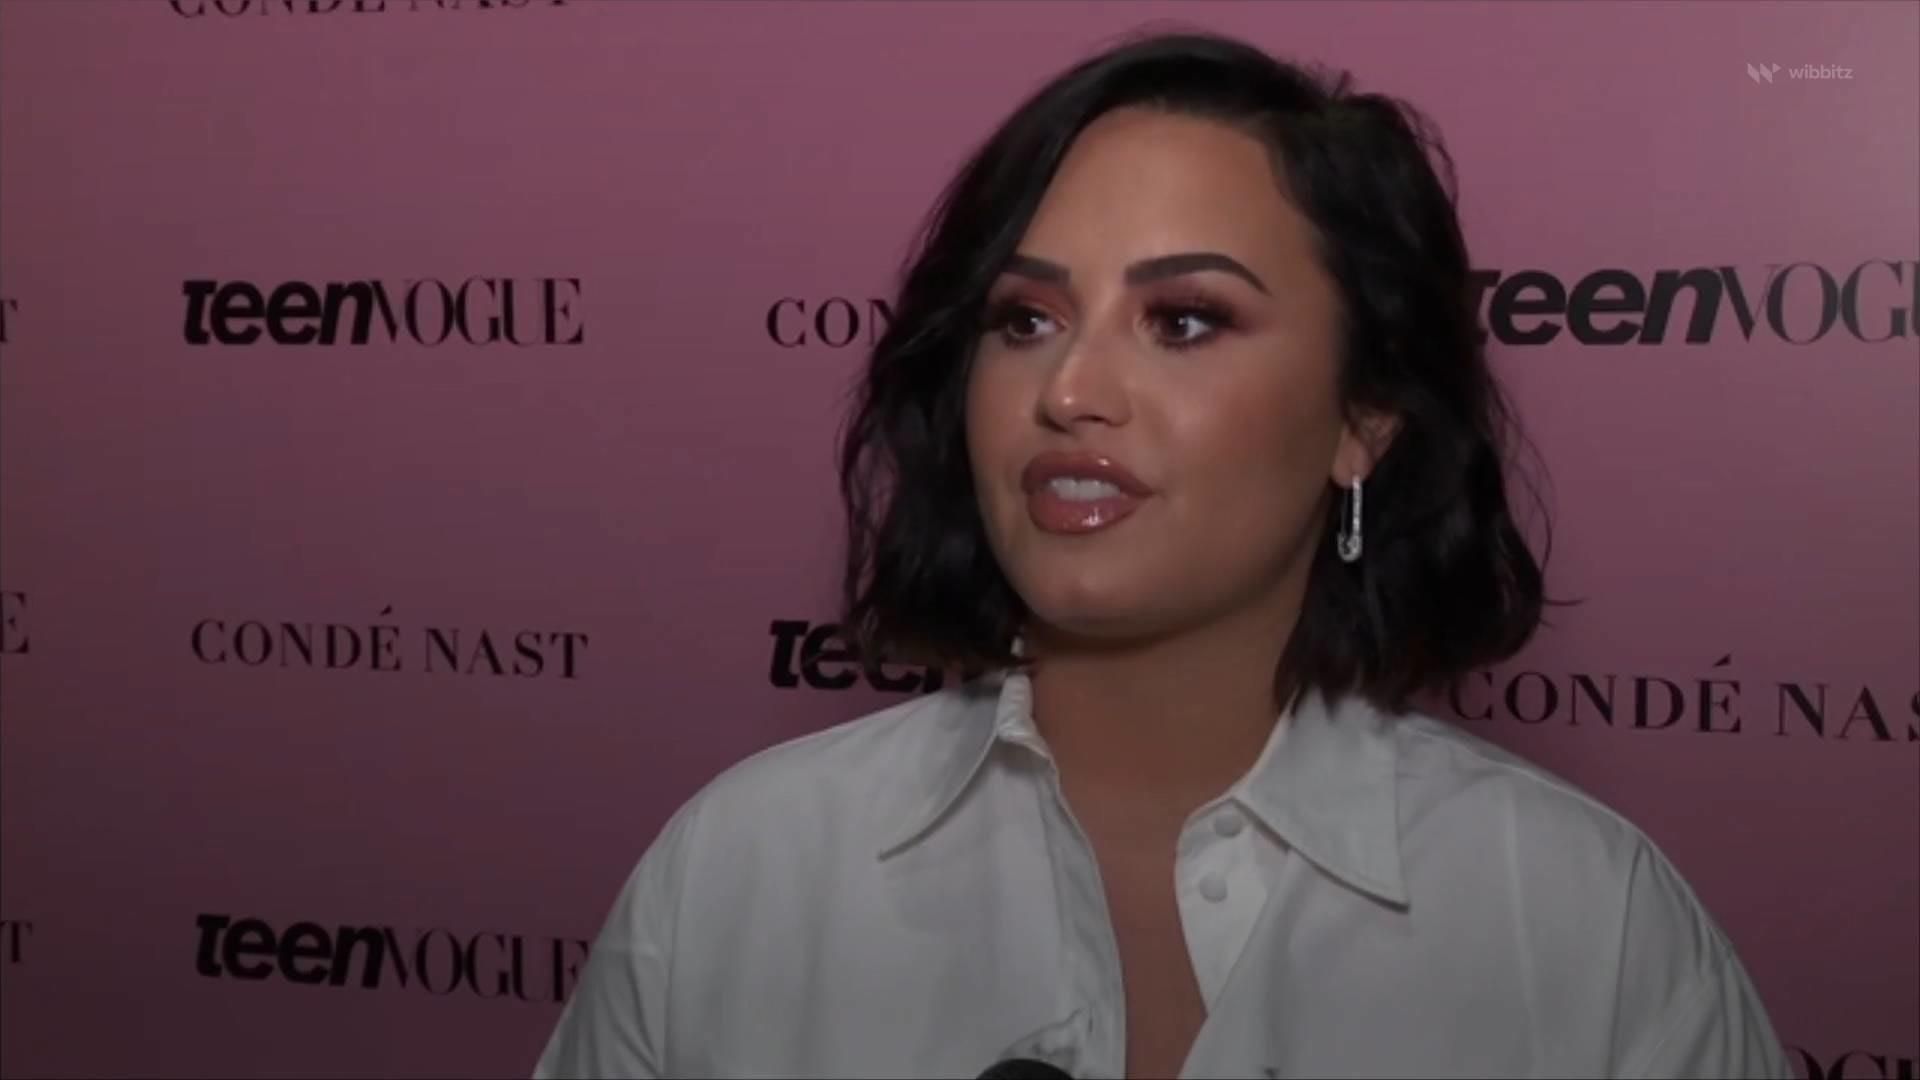 Demi Lovato has updated pronouns to include she/her again | indy100